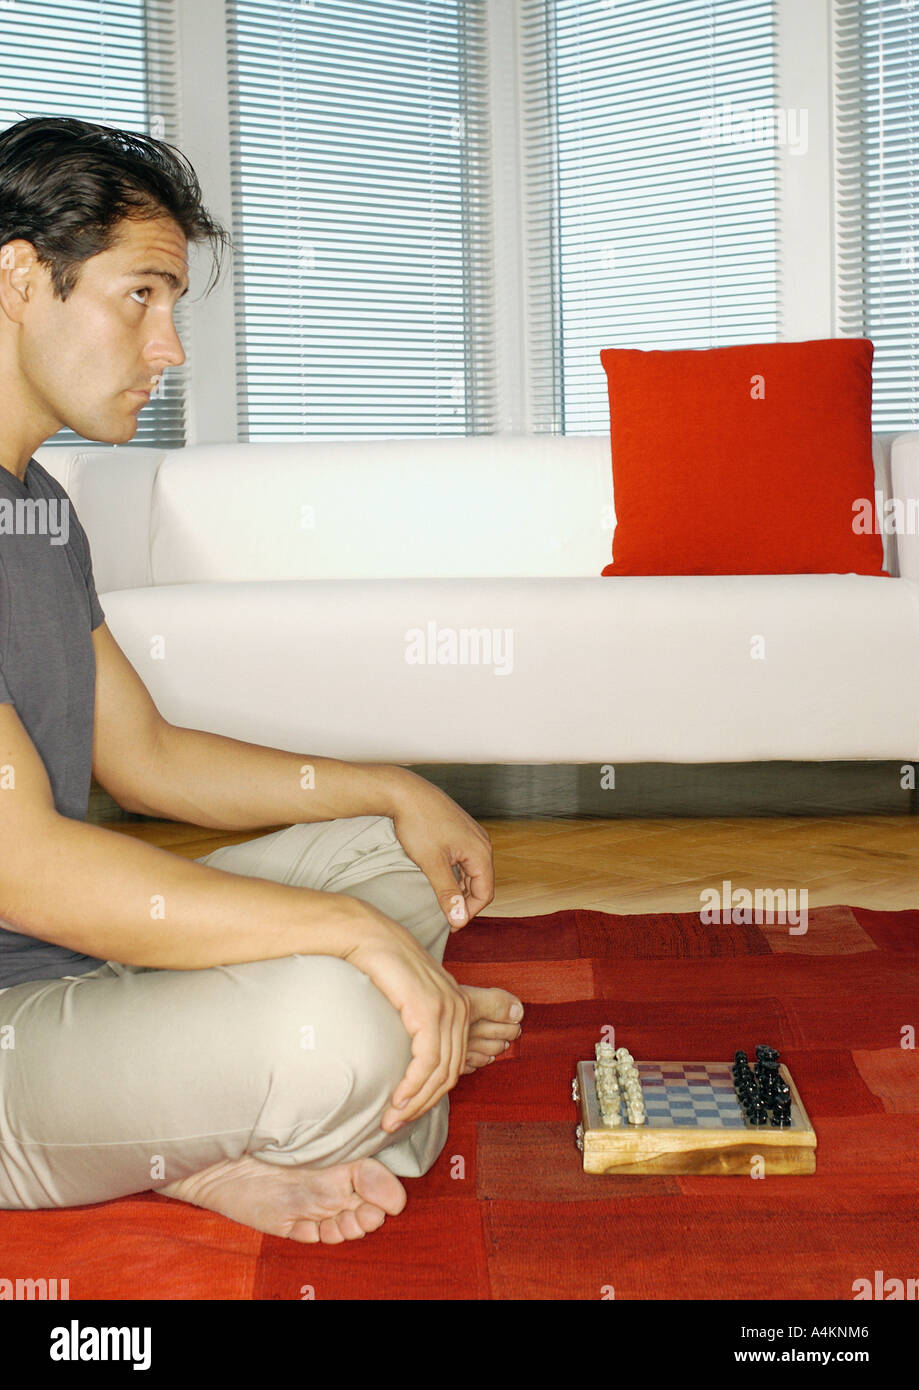 Man sitting on floor playing chess, side view Stock Photo